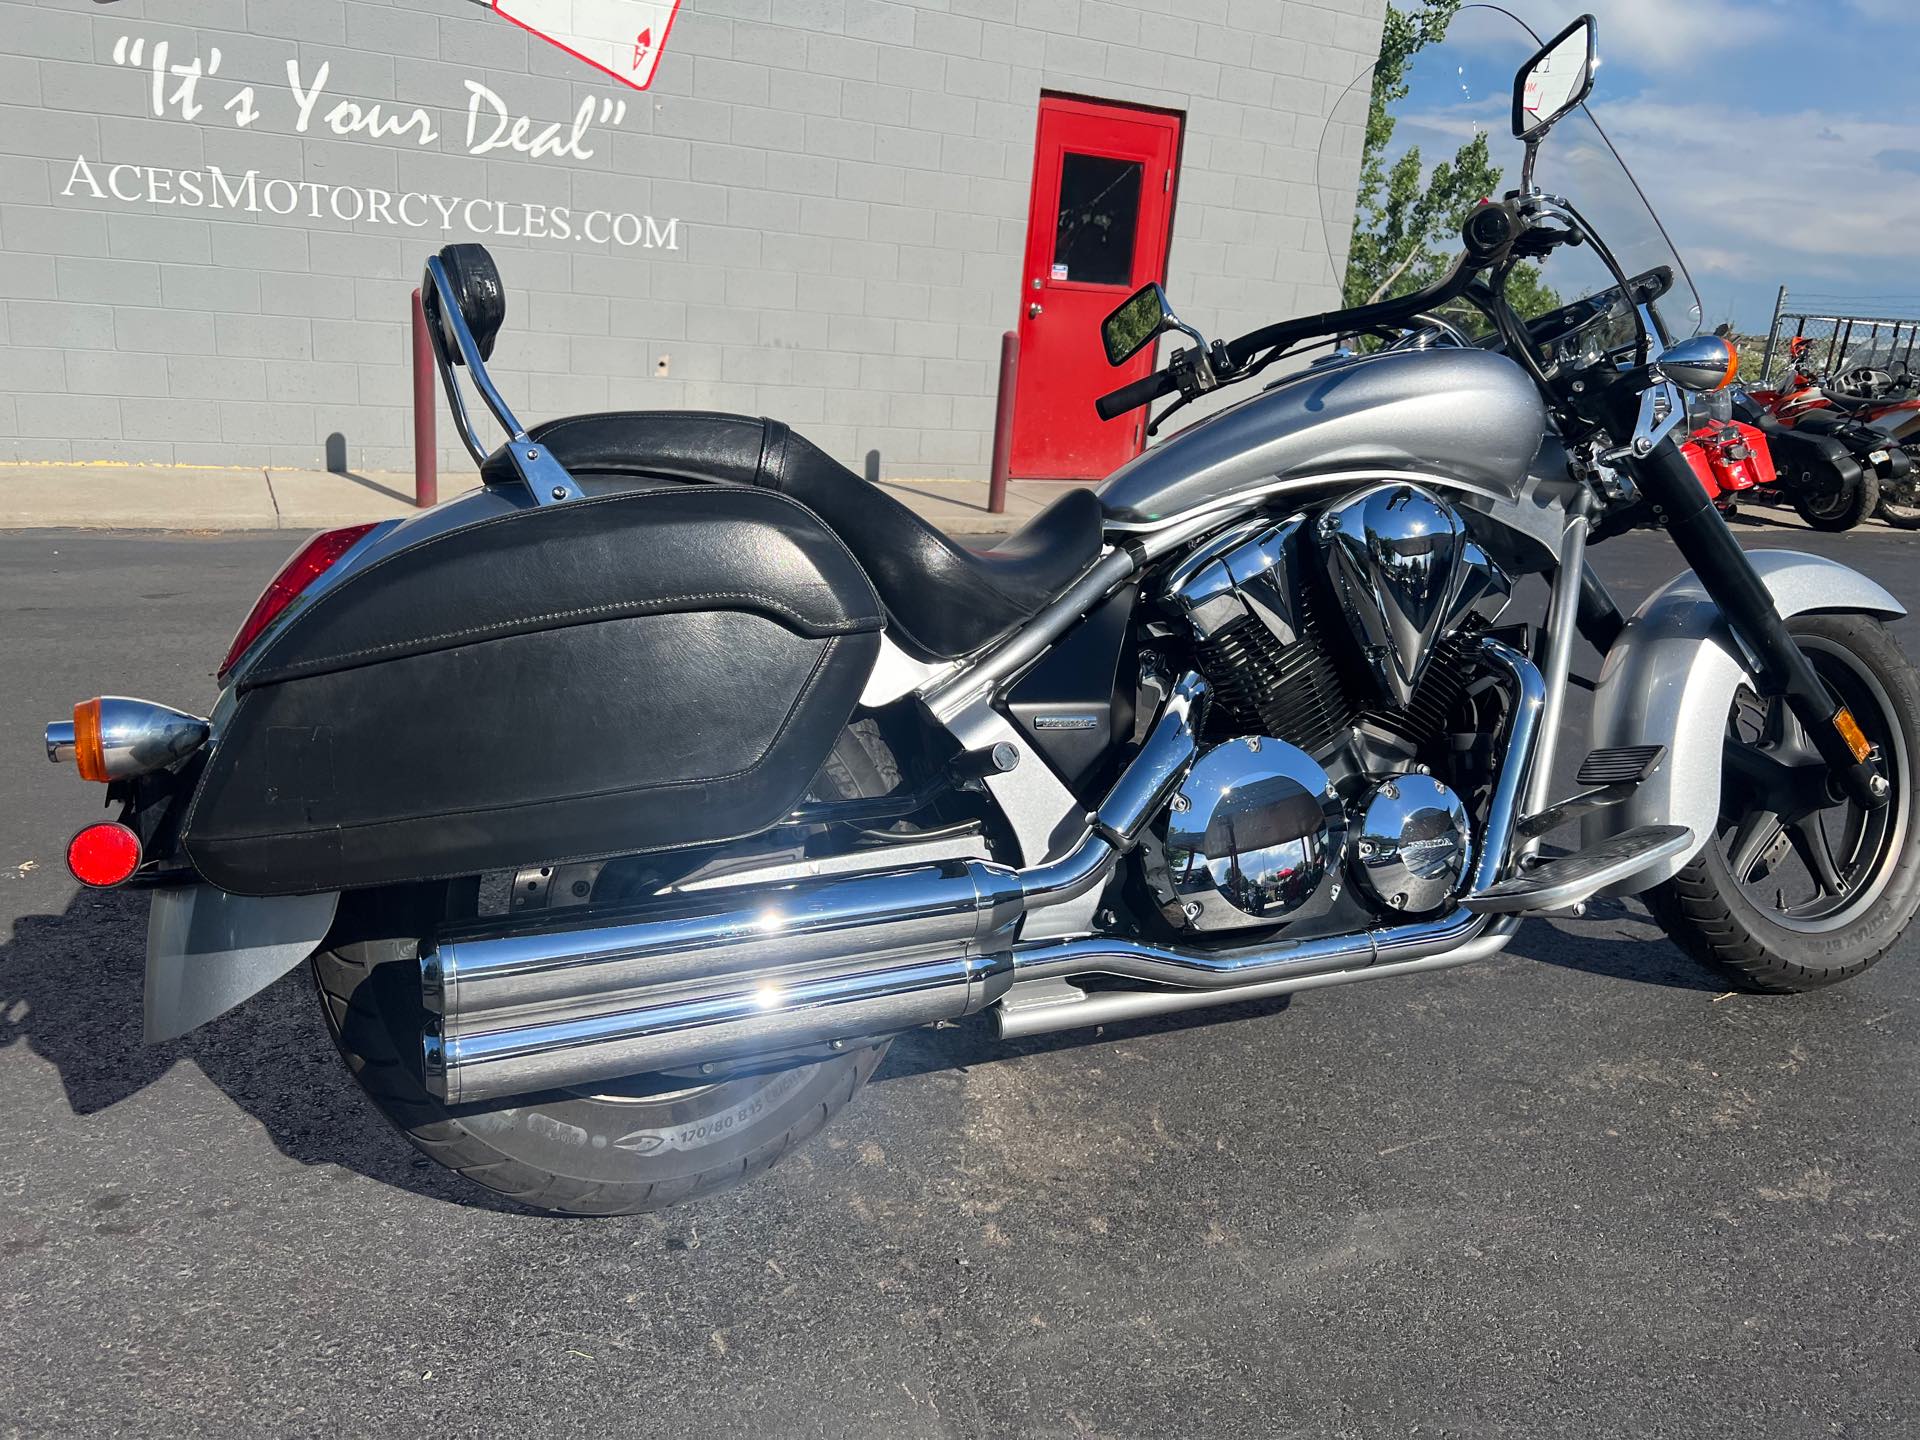 2013 Honda Interstate Base at Aces Motorcycles - Fort Collins